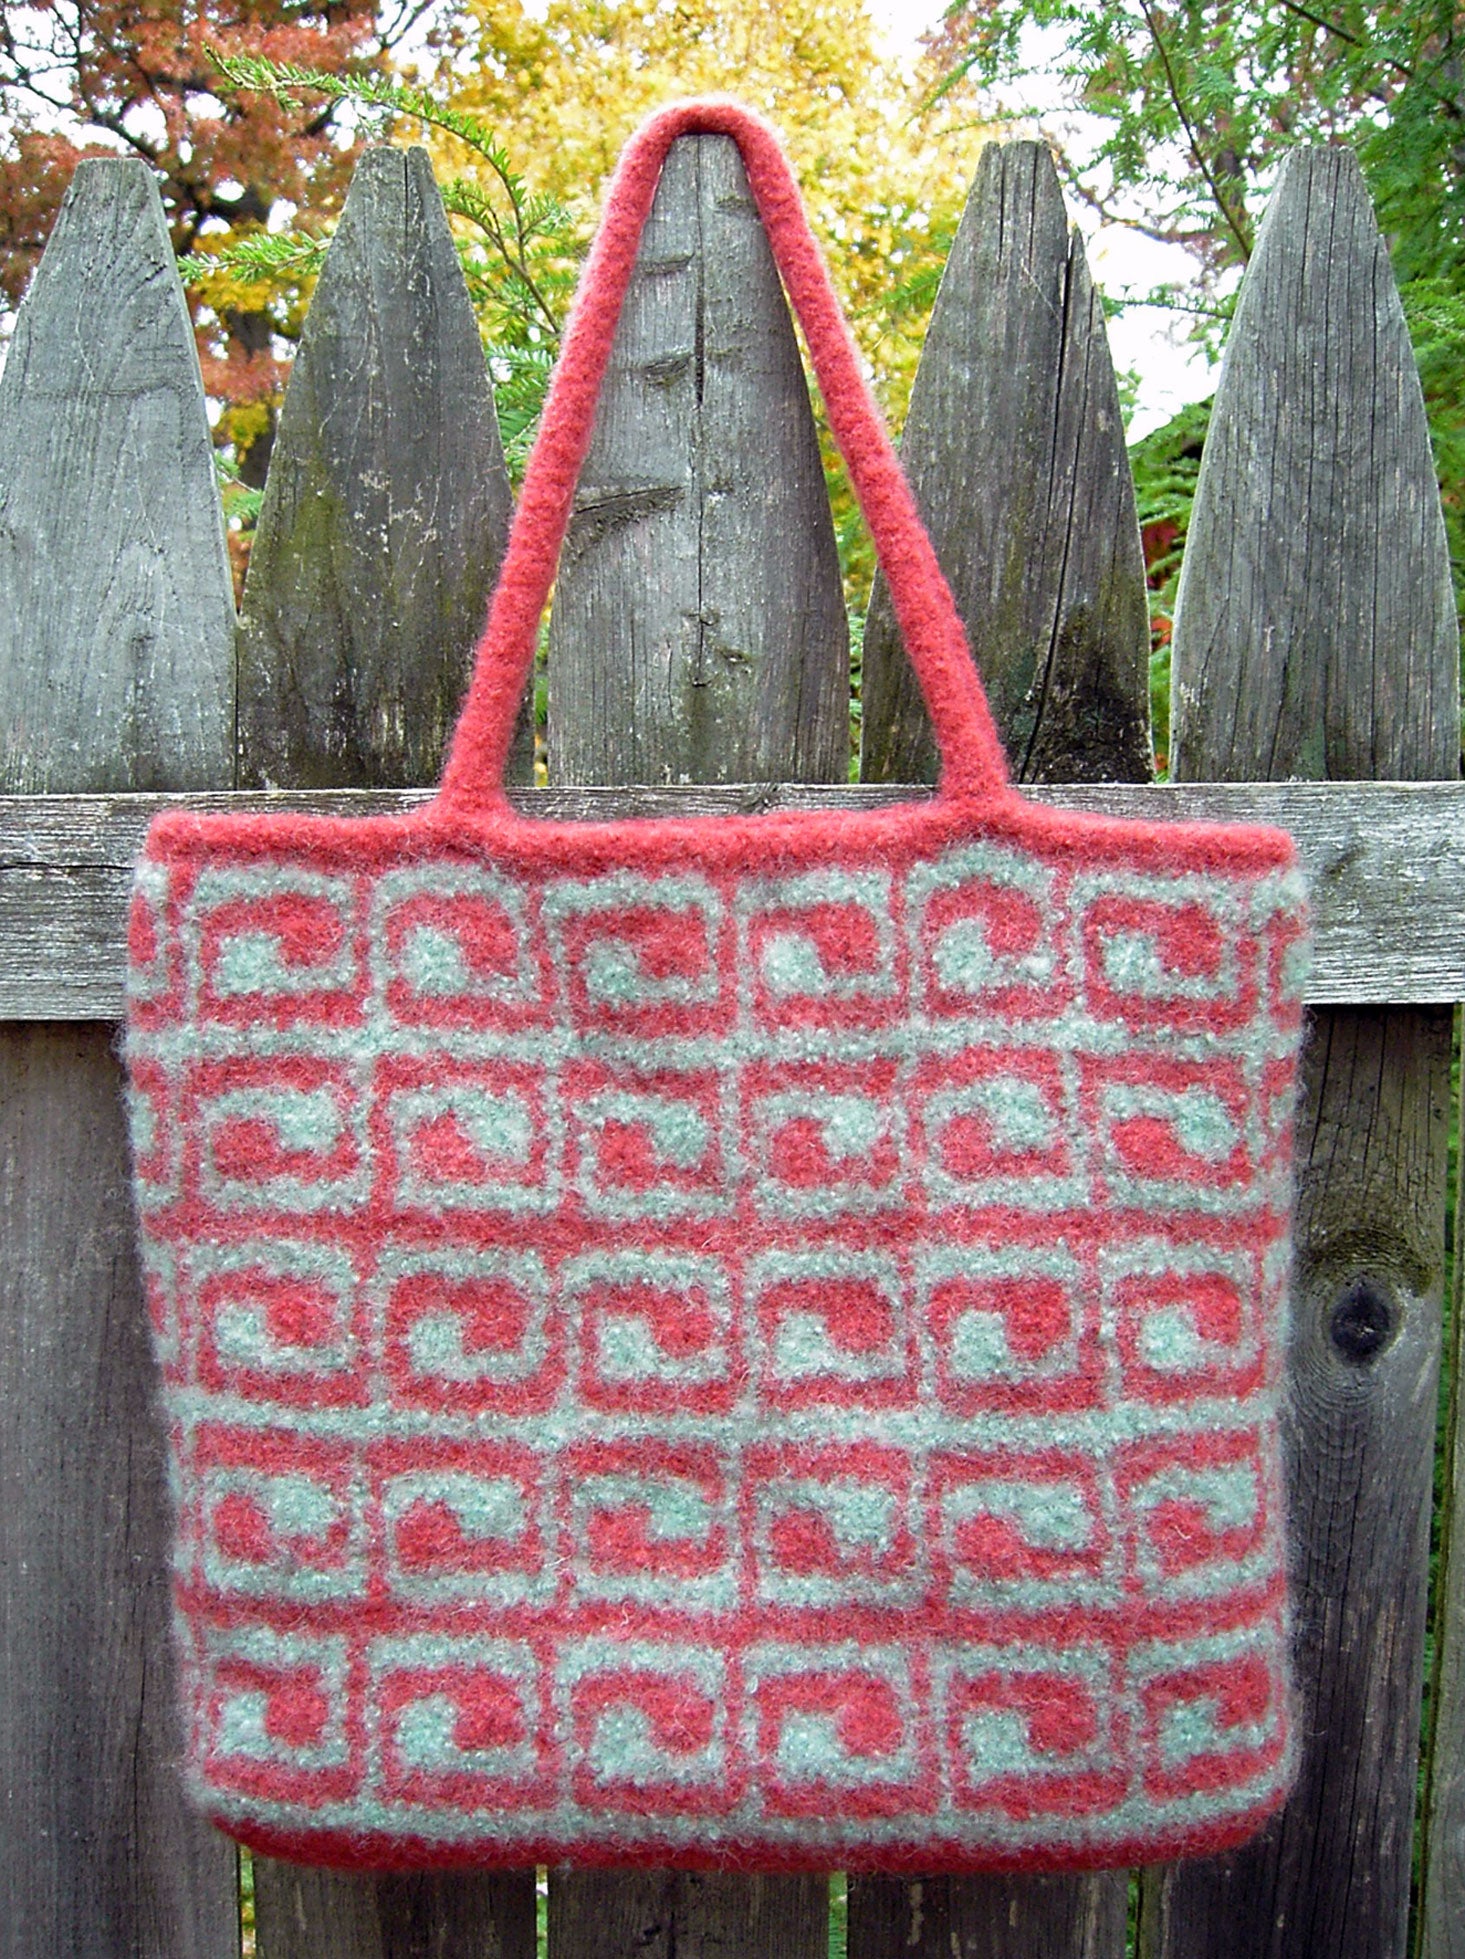 Box in Box Felted Bag